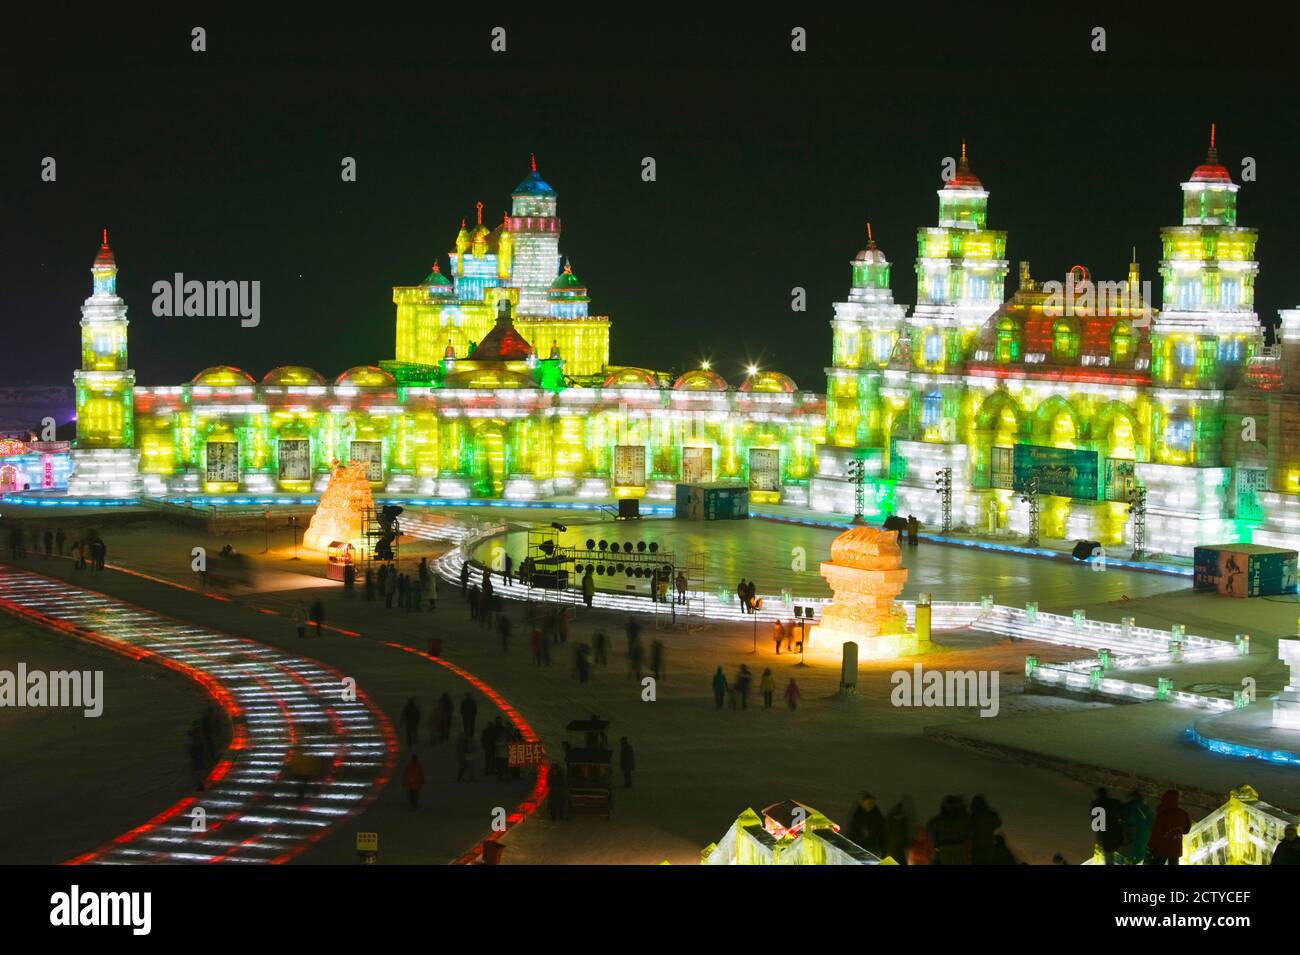 Tourists at the Harbin International Ice and Snow Sculpture Festival, Harbin, Heilungkiang Province, China Stock Photo